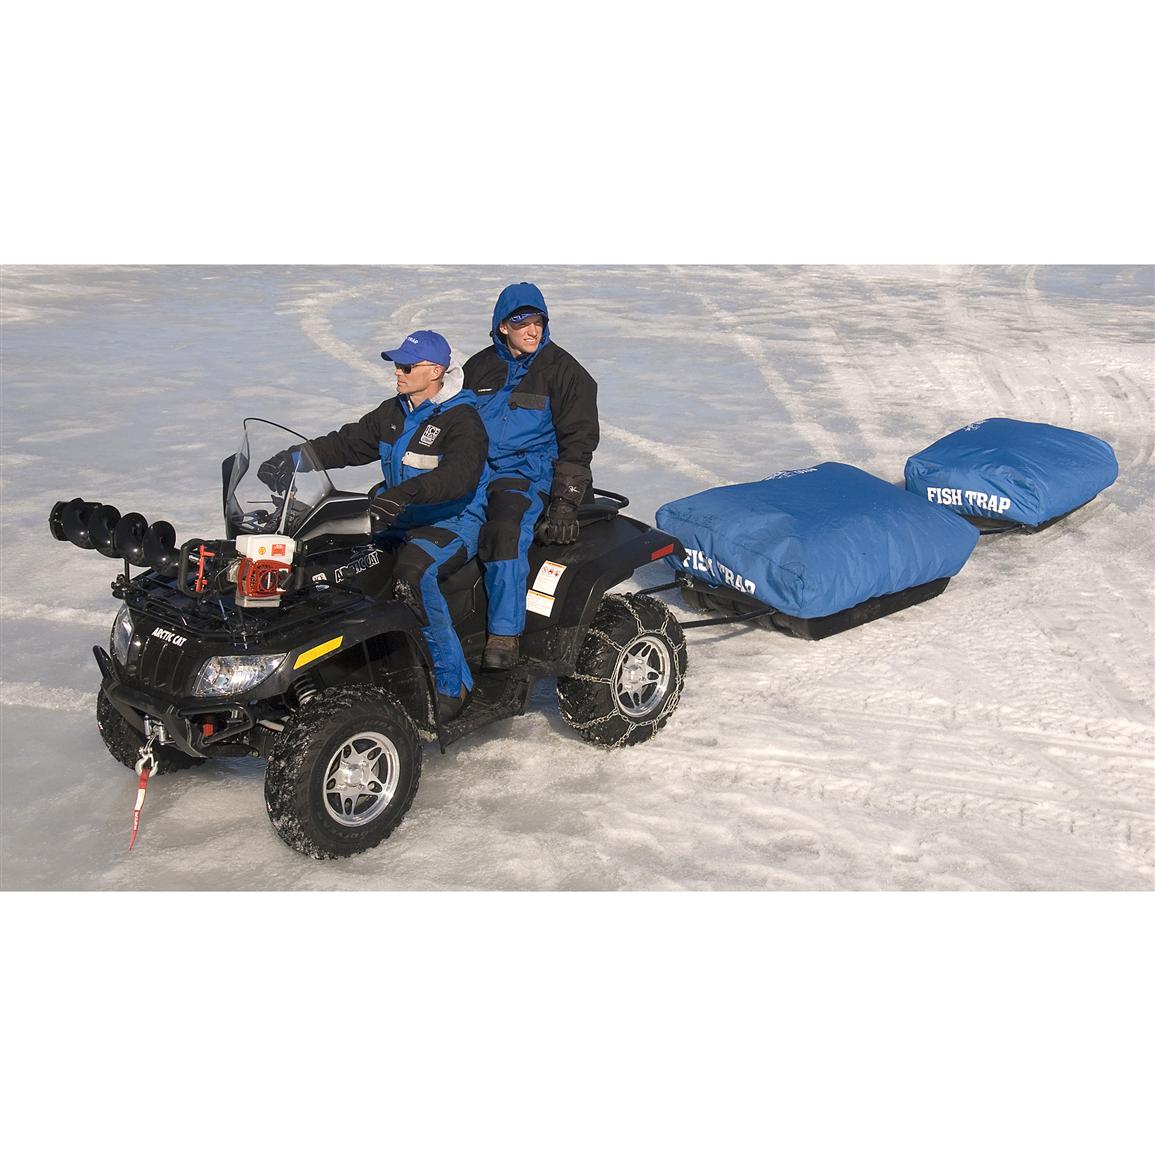 Shappell Ice Fishing Jet Sled XL - 669915, Ice Fishing Sleds at